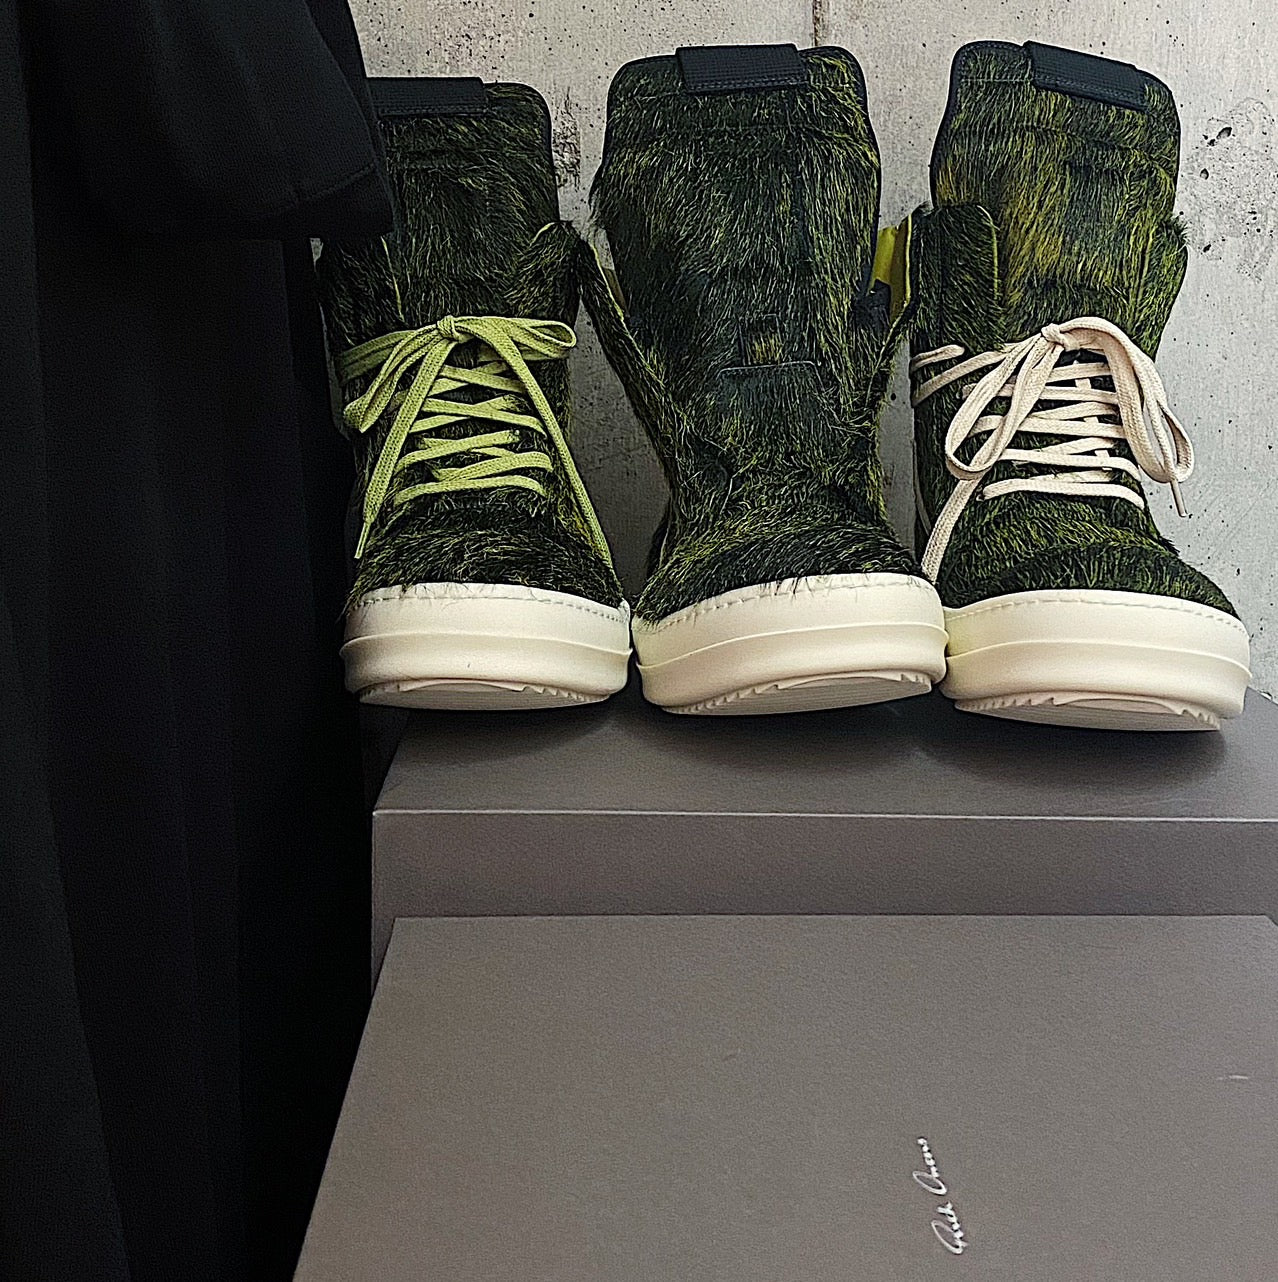 【Rick Owens】<br> New items from the 23FW collection 「LUXOR」 are now available!